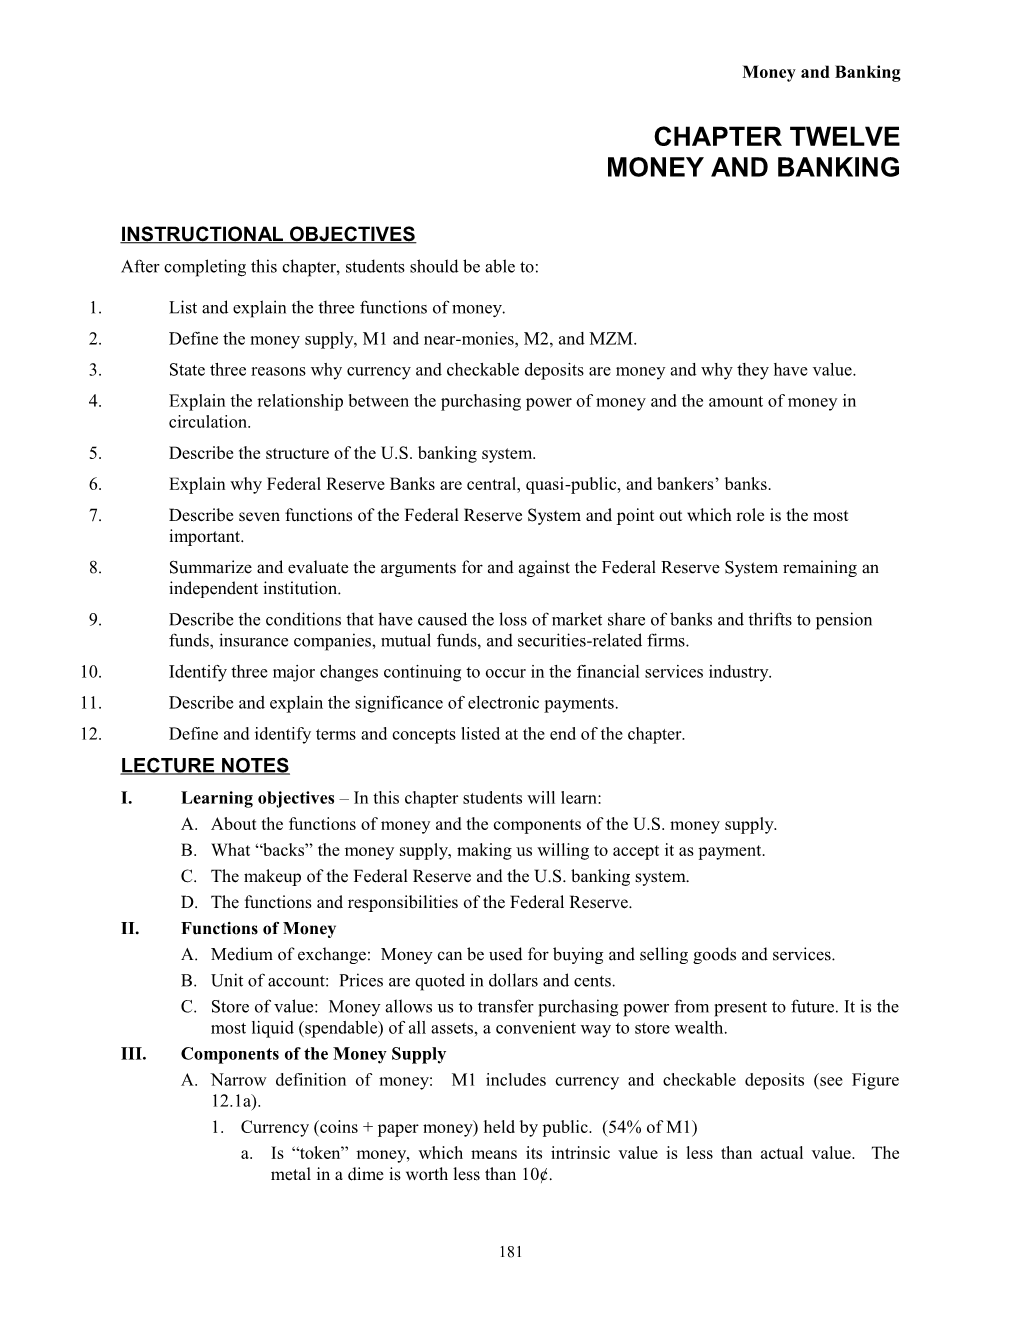 Money and Banking s1